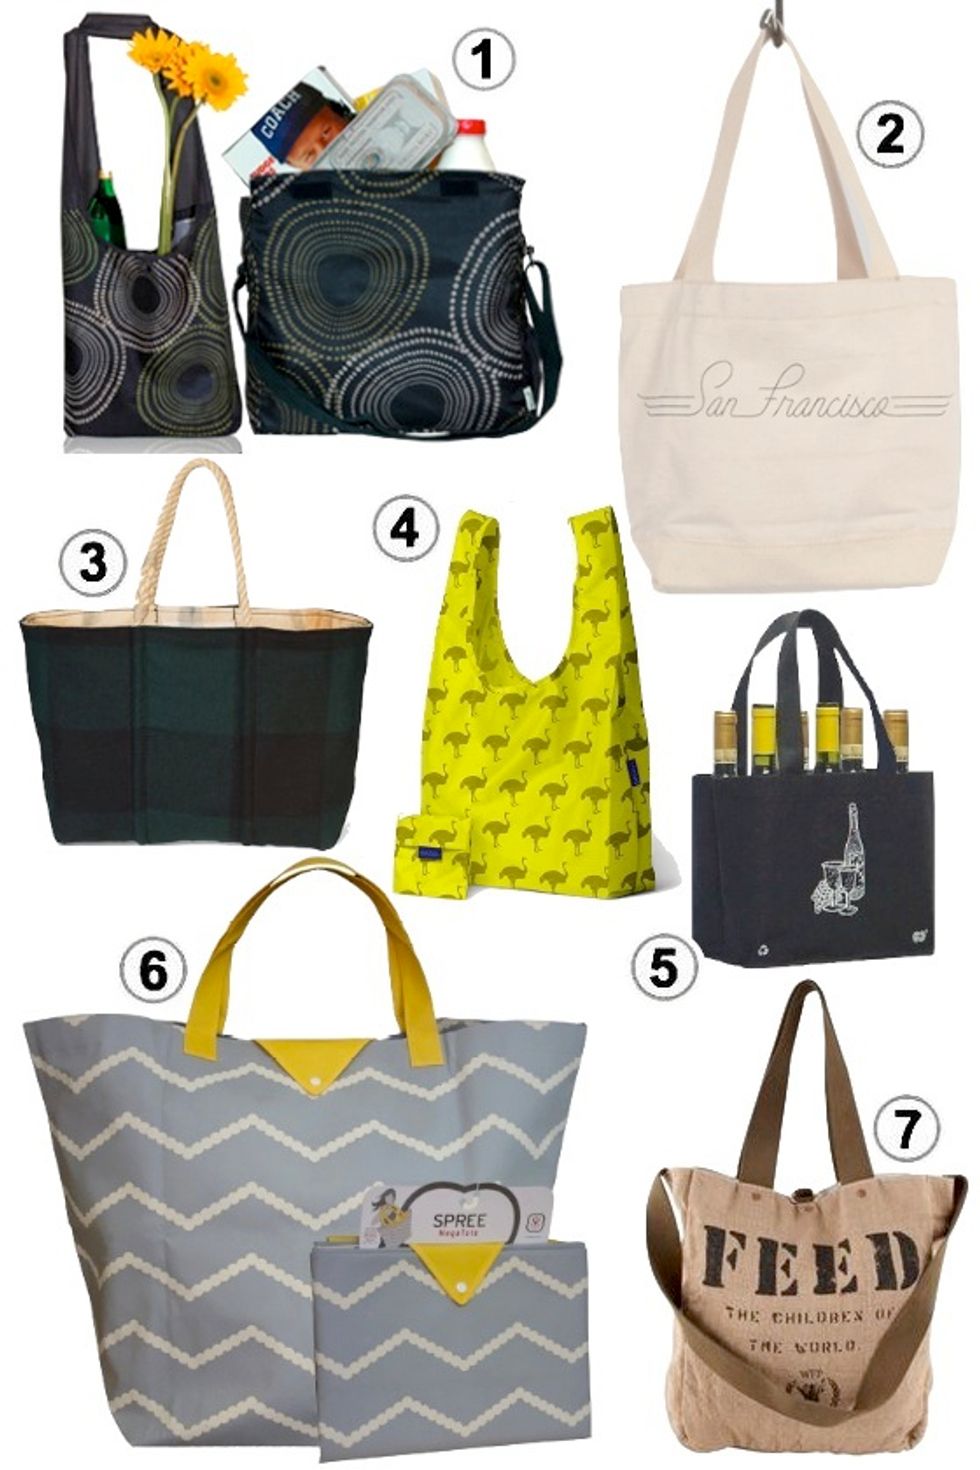 Look of the Week: Our Favorite Reusable Shopping Bags